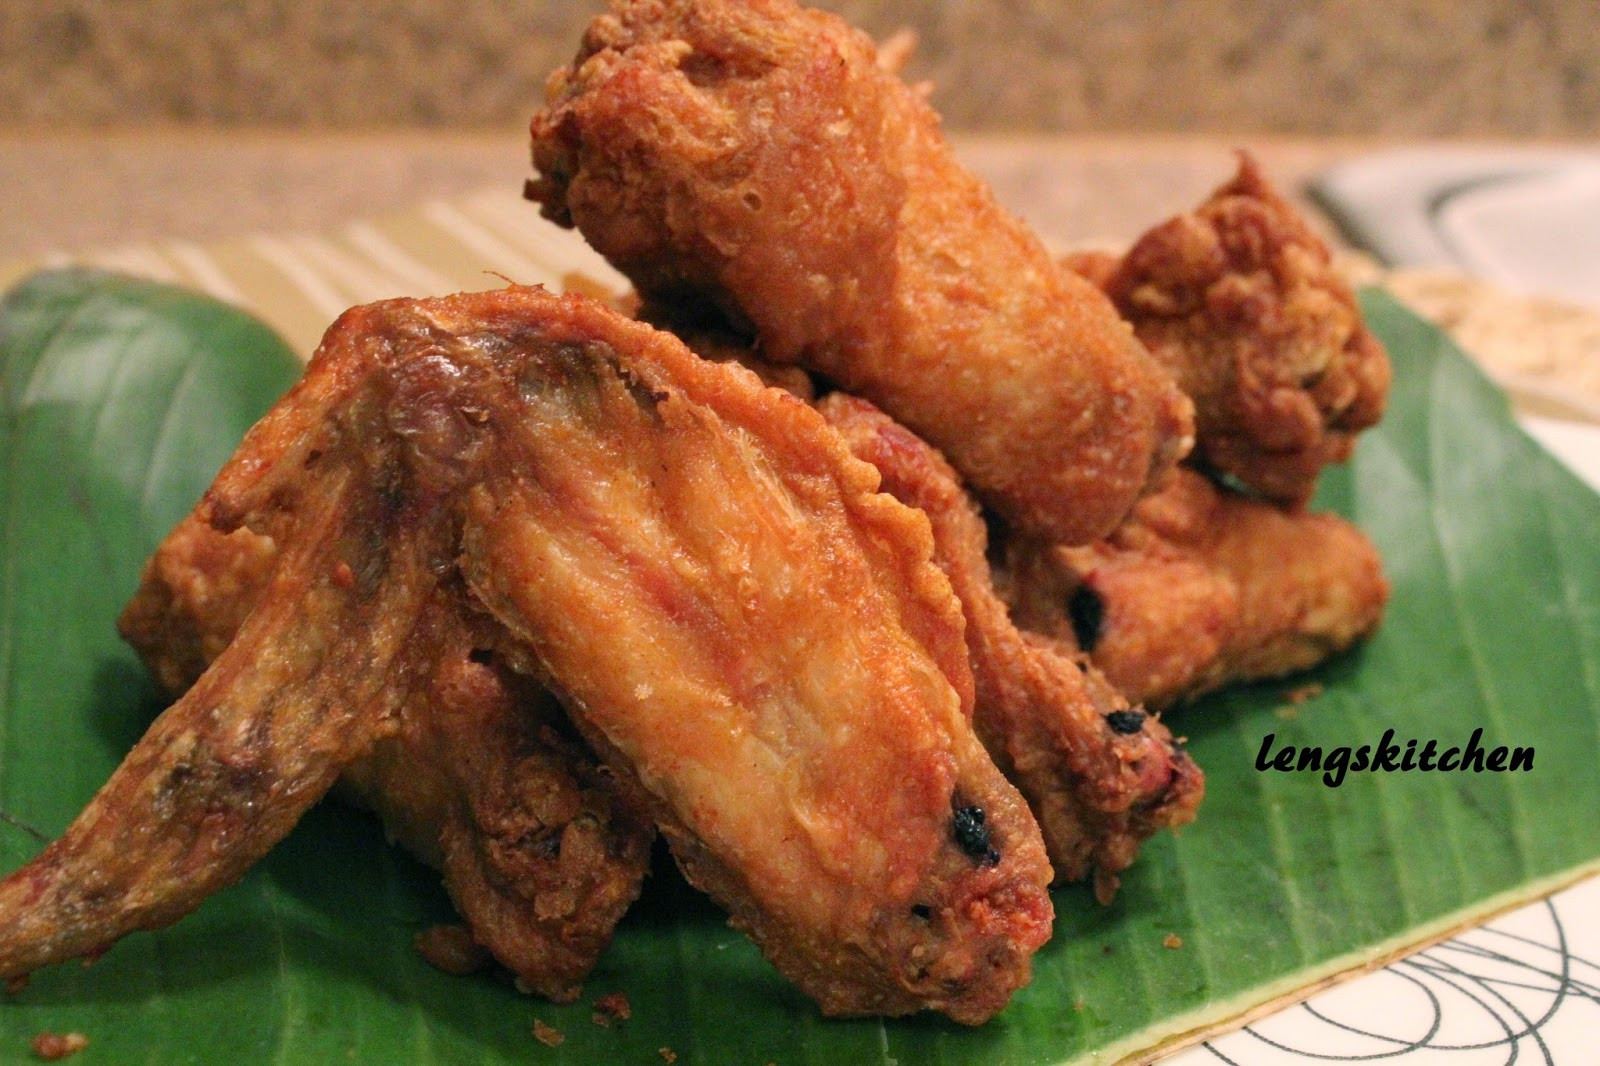 Chinese Fried Chicken Wing Recipes
 Kitchen Chaos Crispy Curry Fried Chicken Wings 香脆咖喱粉炸鸡翼